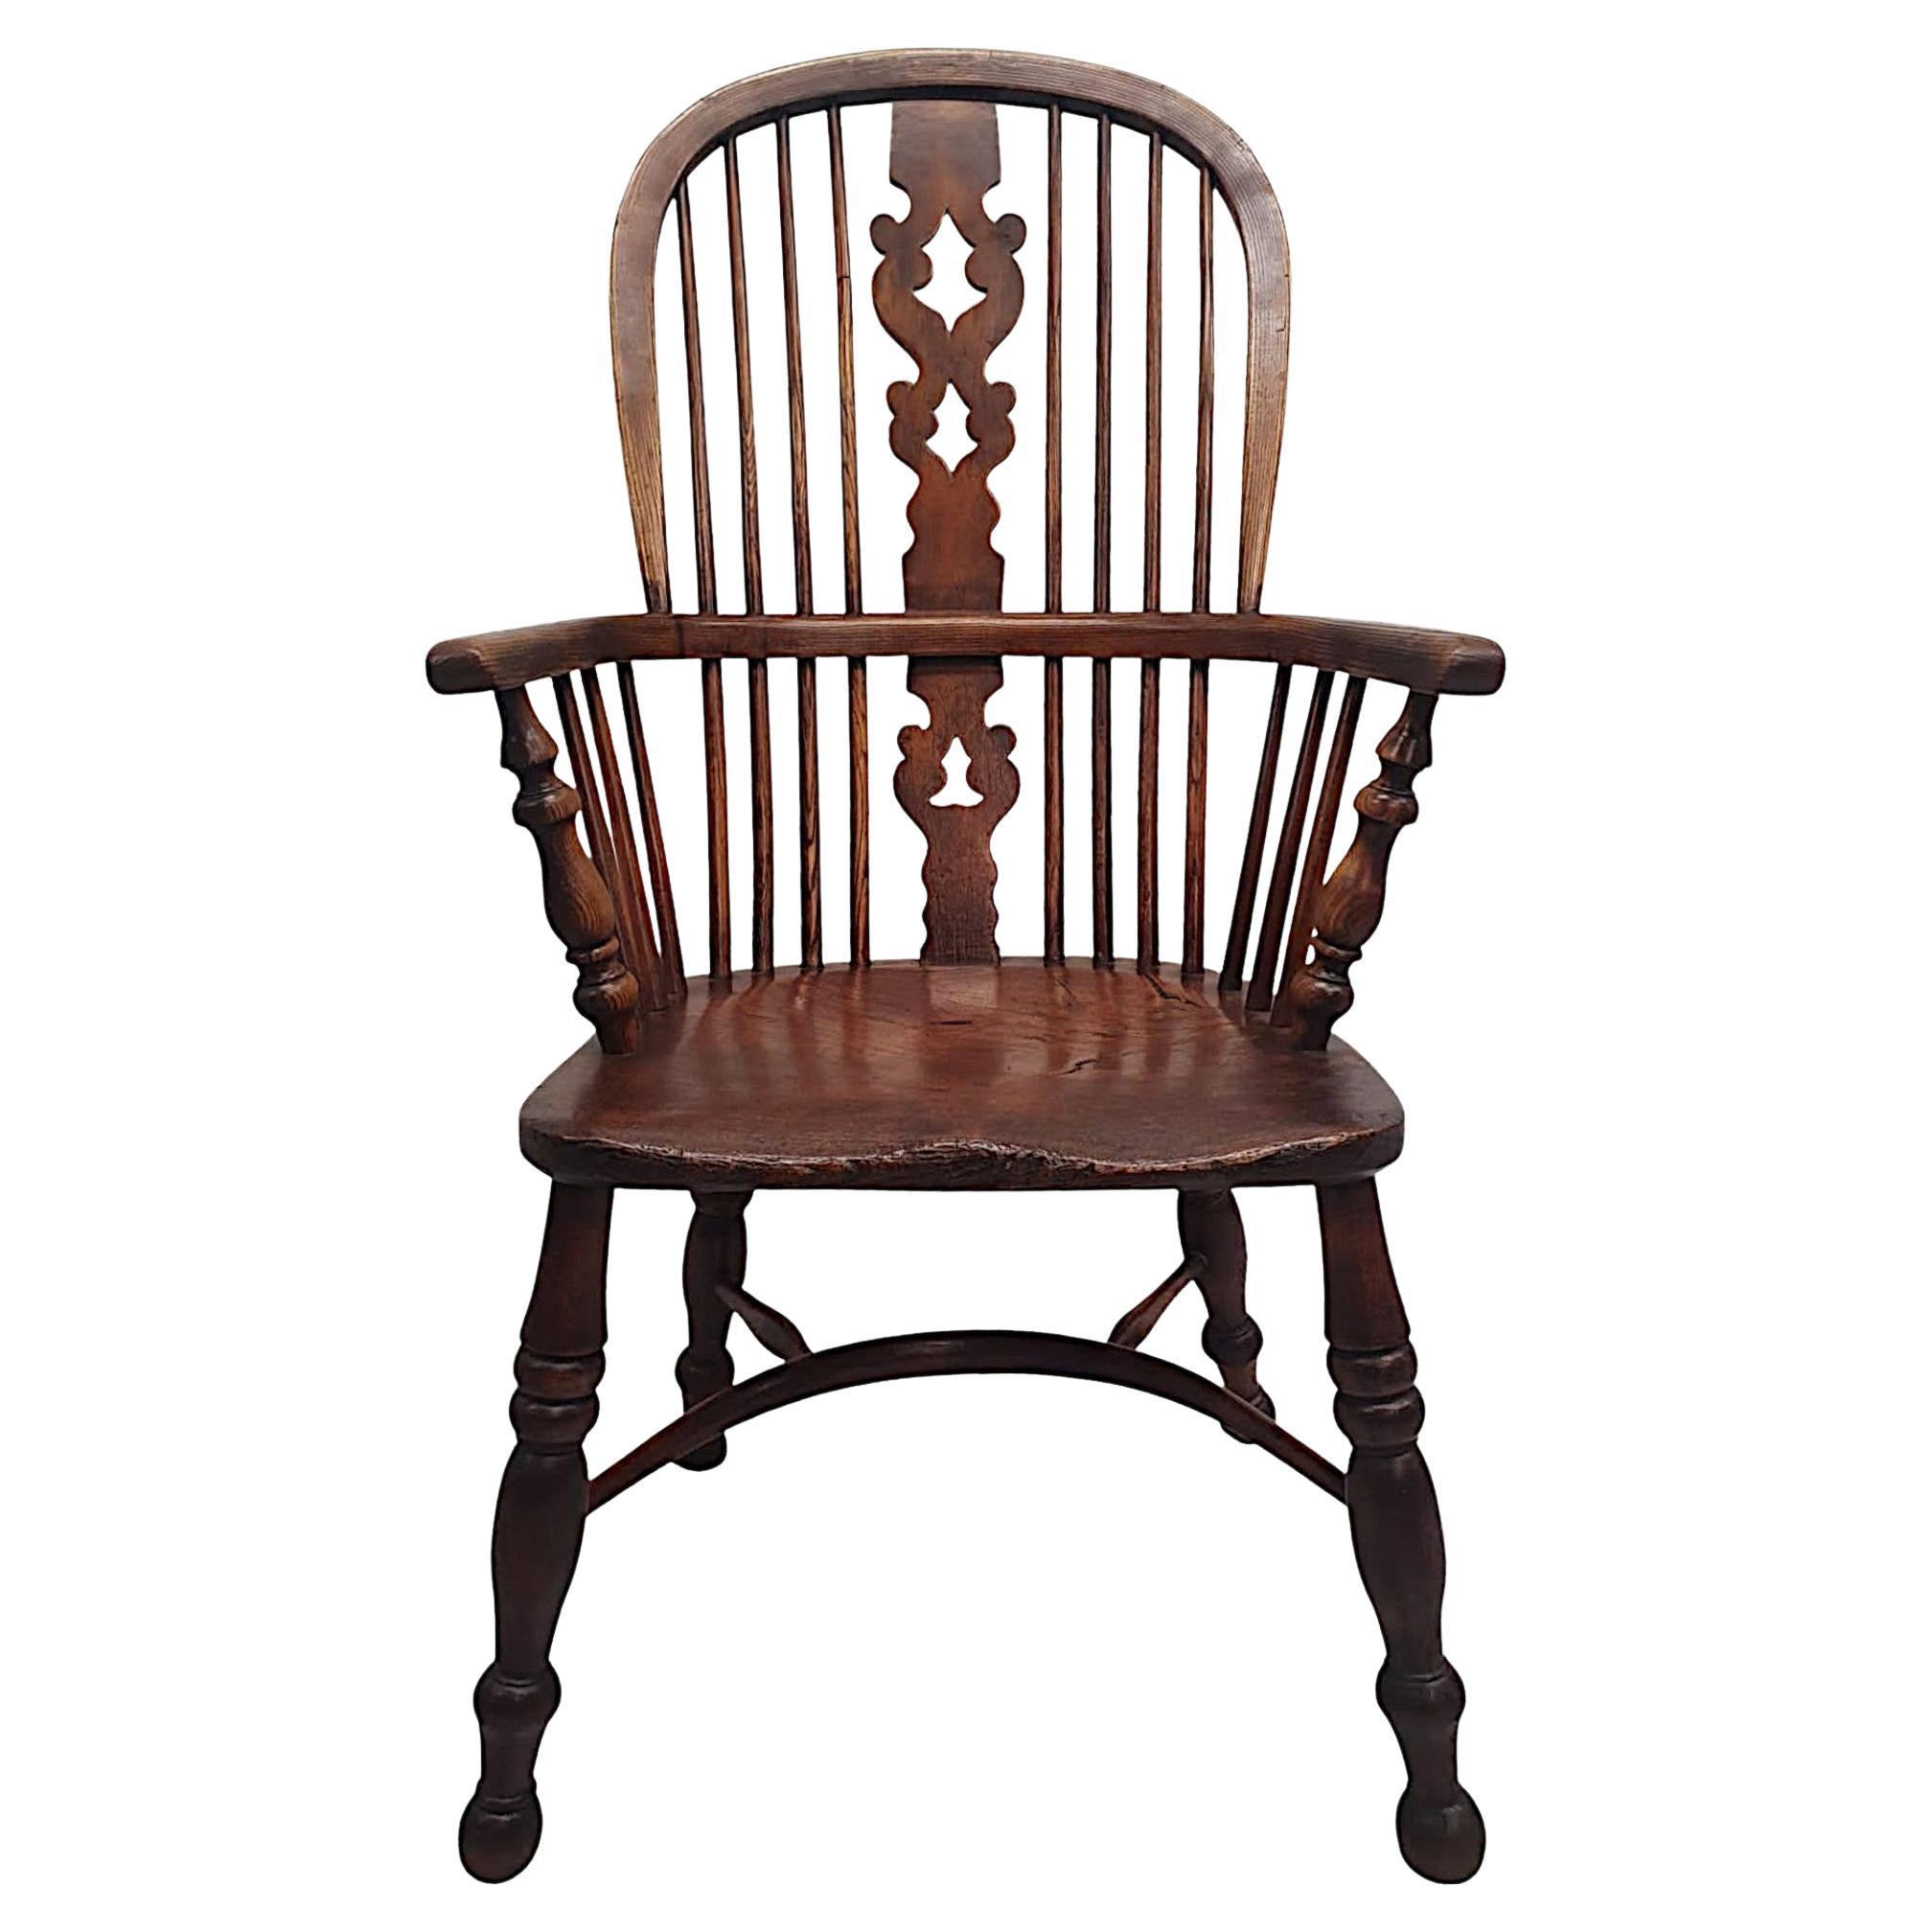 Very Rare and Fine 19th Century High Back Windsor Armchair For Sale